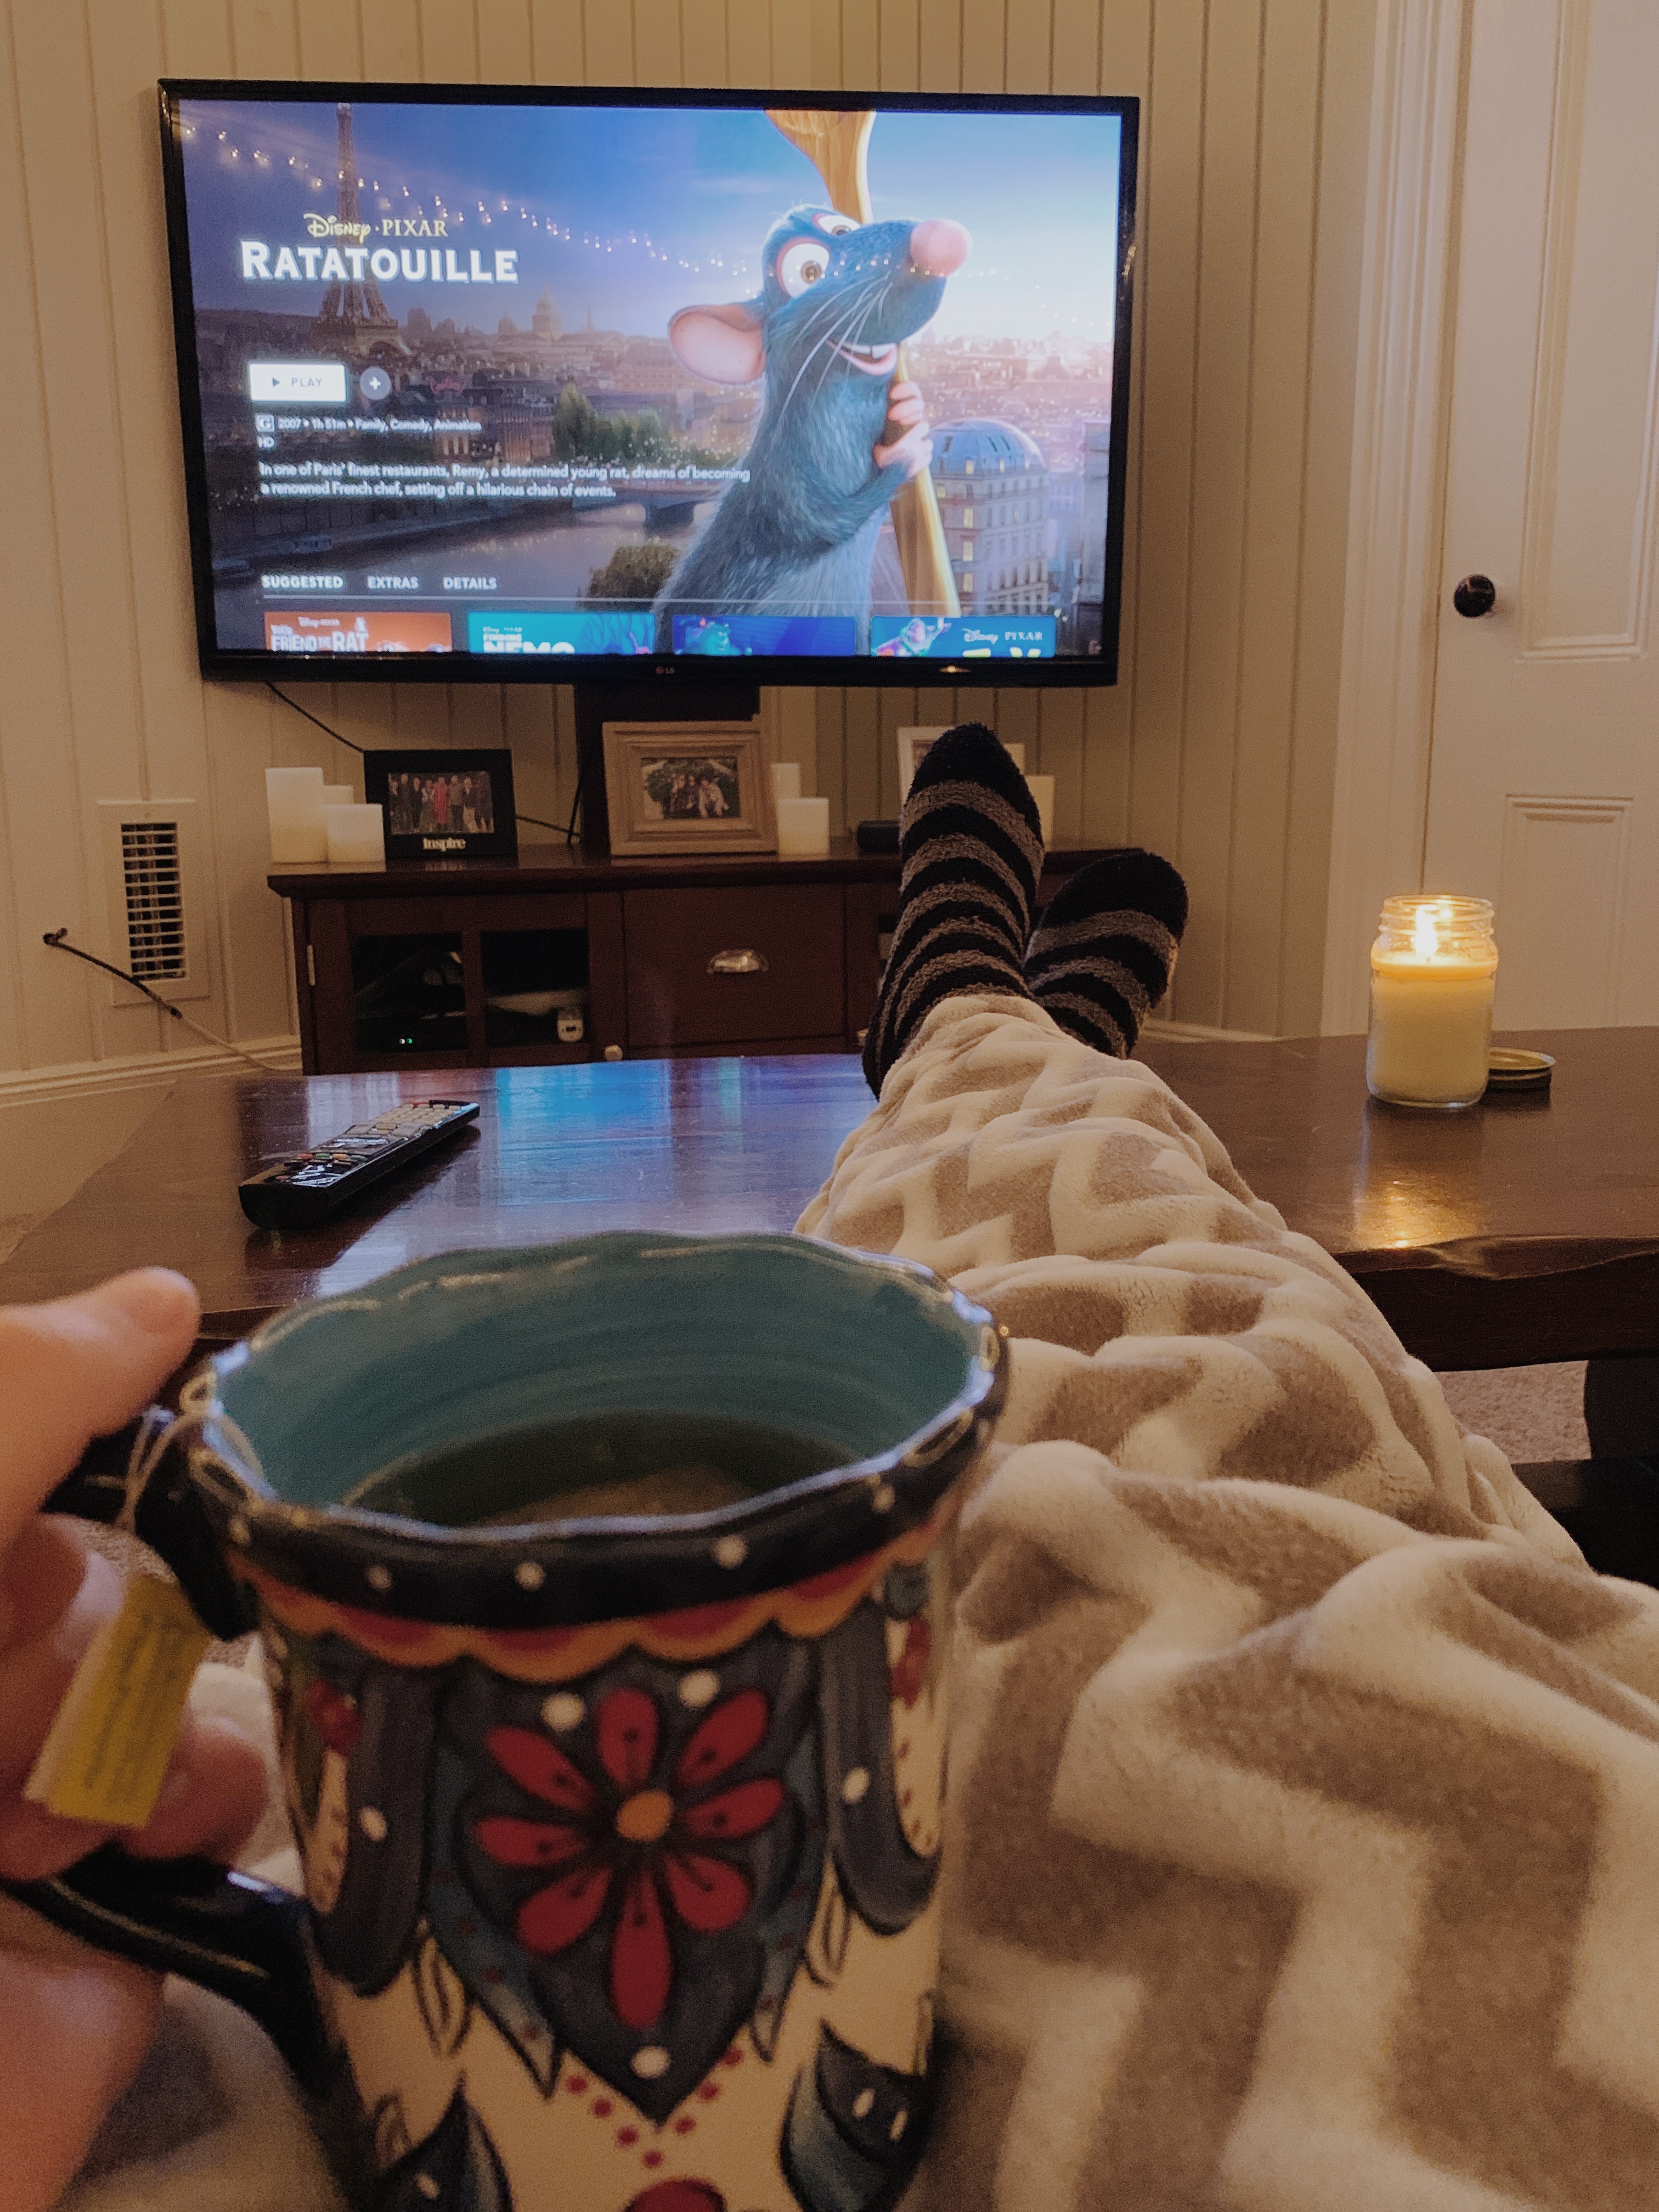 Cozy, watching travel movies with tea